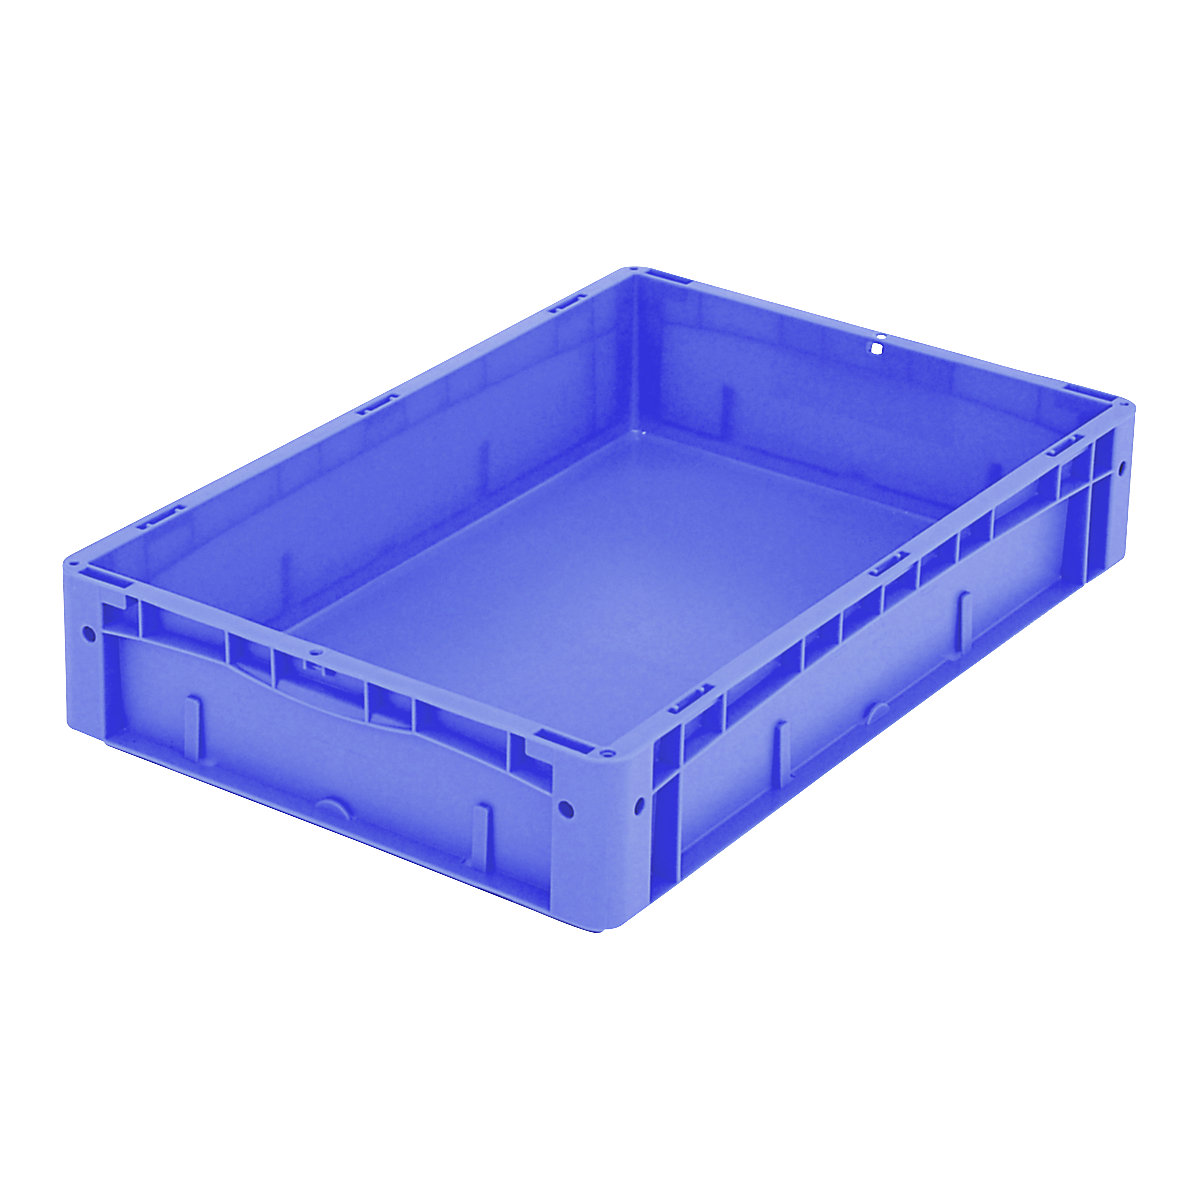 XL Euro stacking container – BITO, standard model, LxWxH 600 x 400 x 120 mm-7